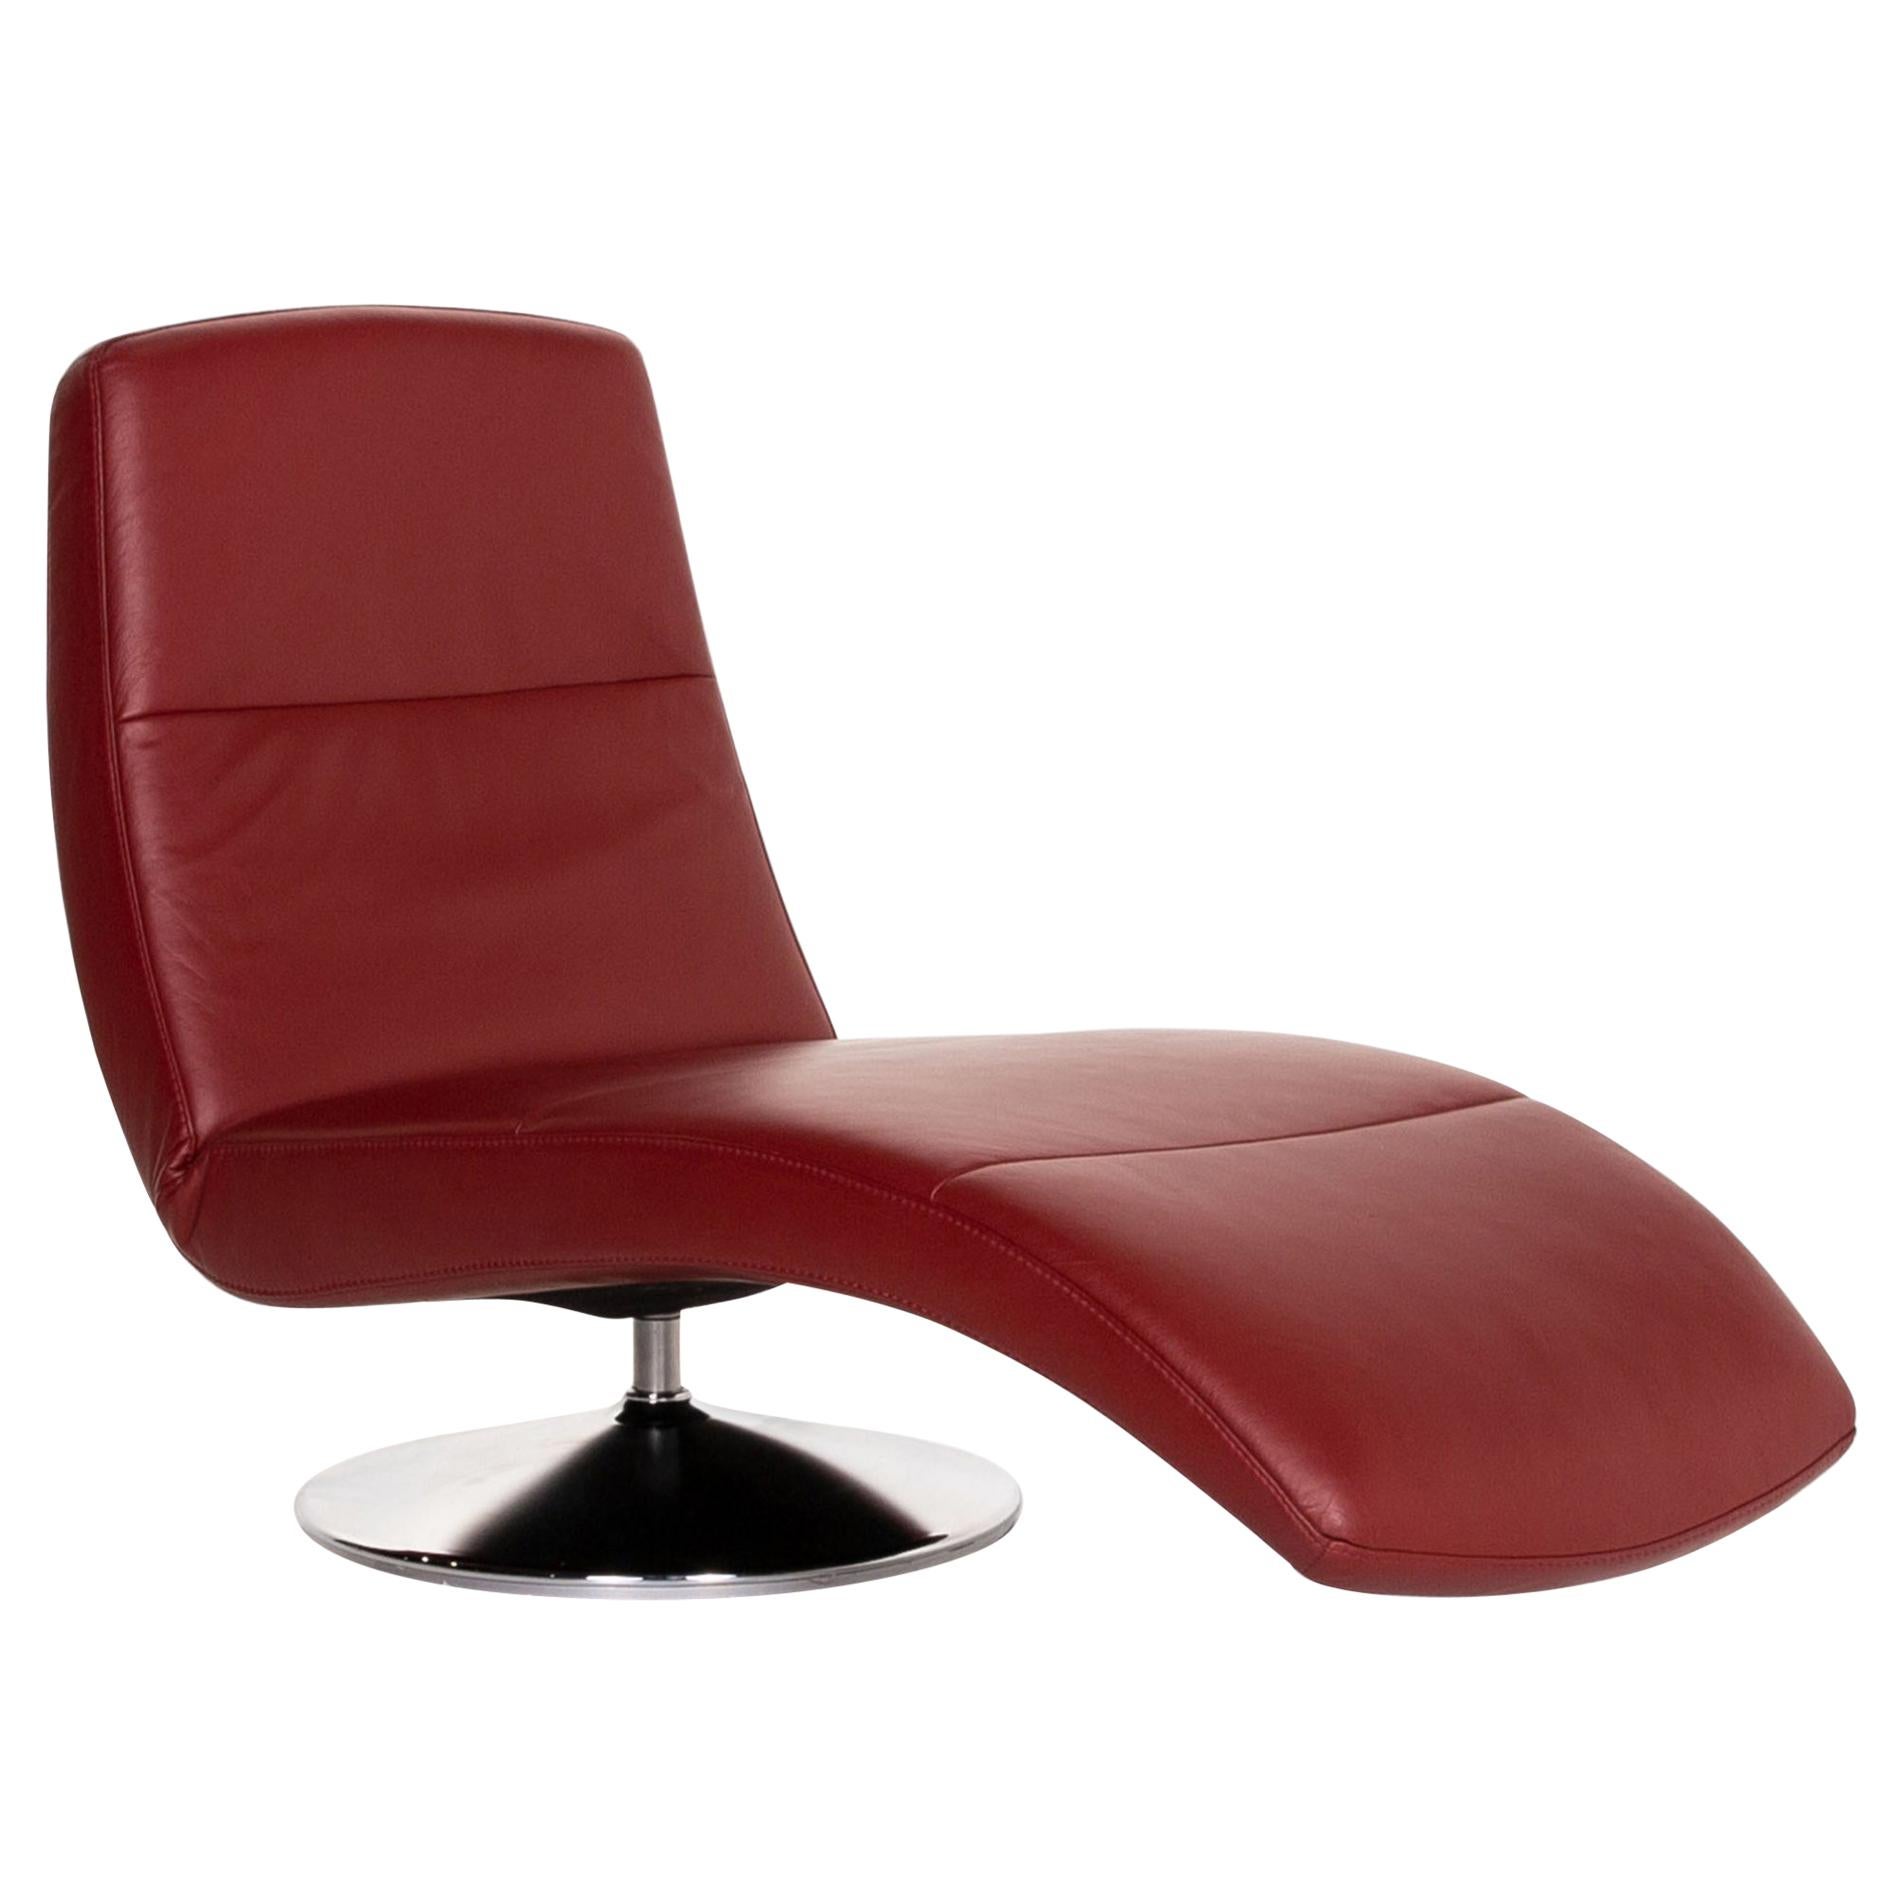 Ewald Schillig Leather Lounger Red Relax Lounger Relax Function Function Relax For Sale